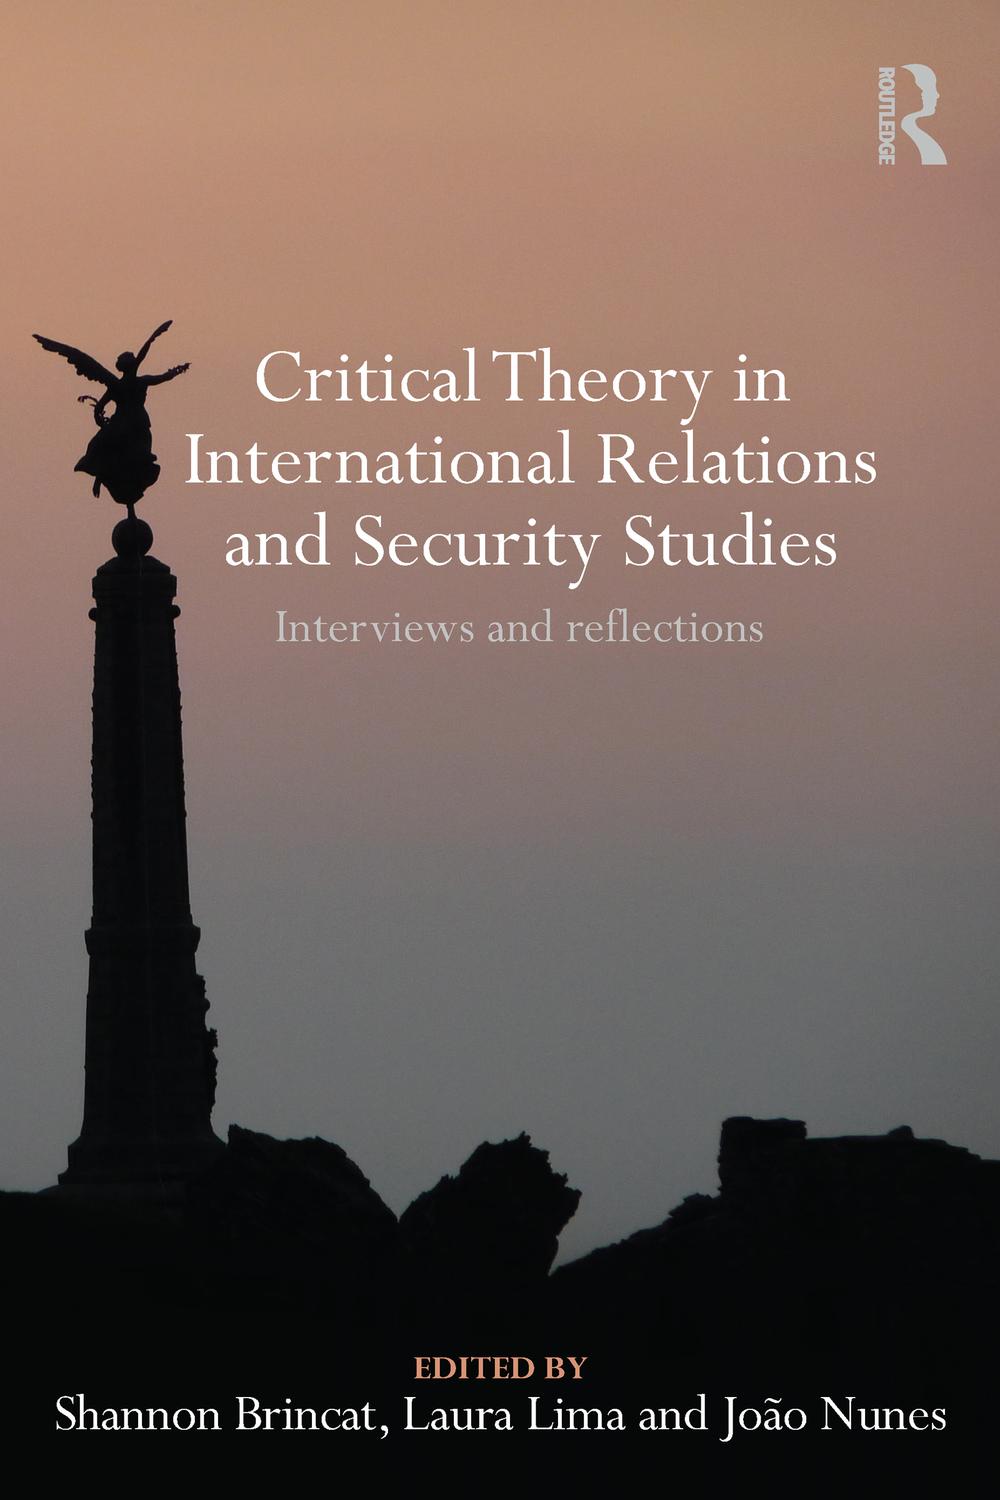 Critical Theory in International Relations and Security Studies - Shannon Brincat, Laura Lima, Joao Nunes